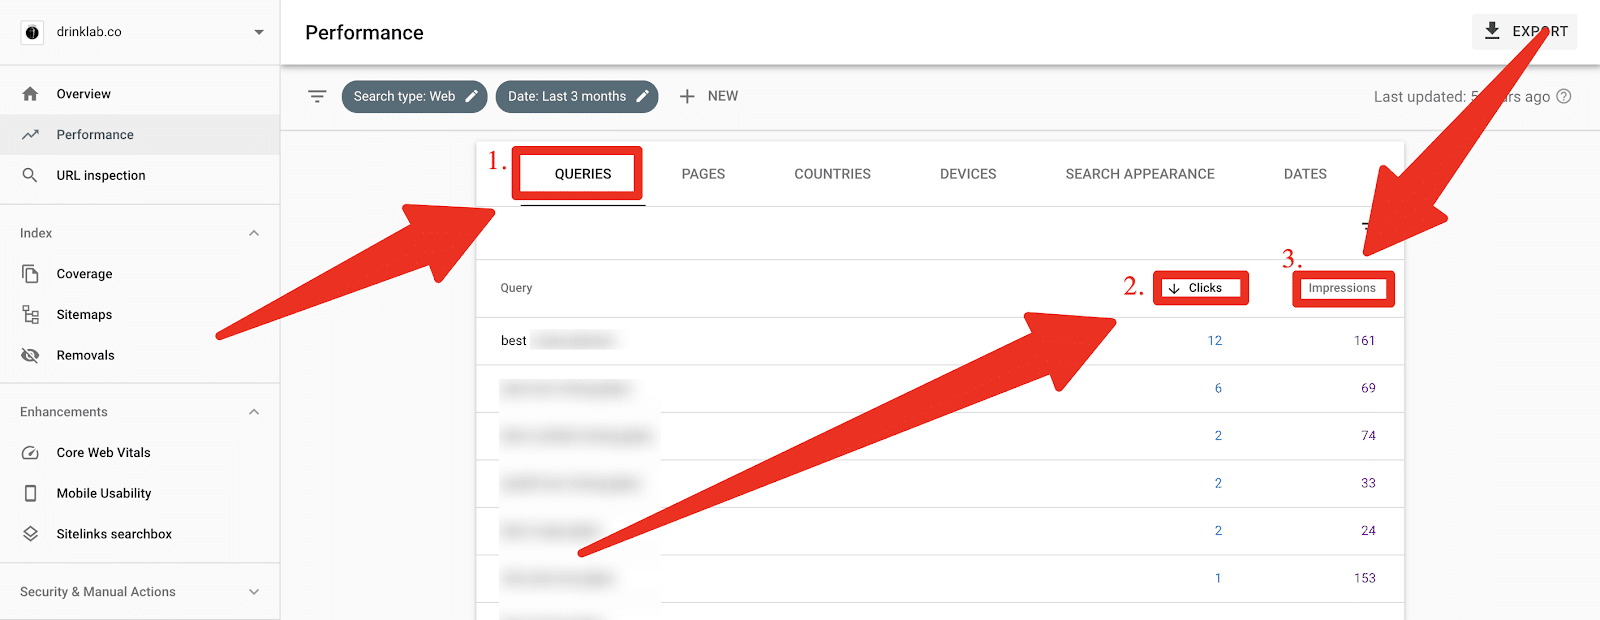 search console screenshot click tracking